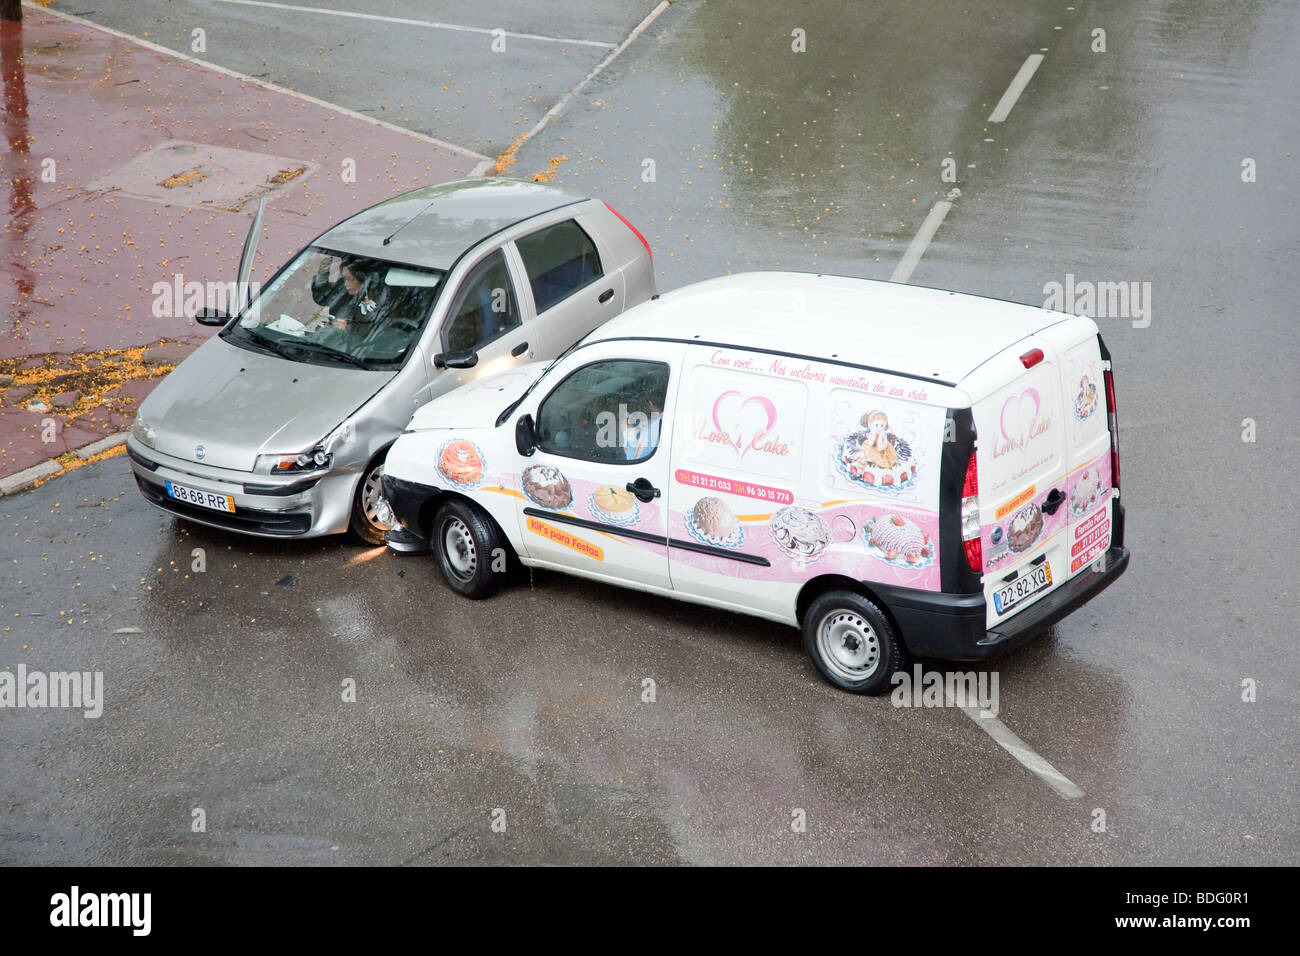 Two women (drivers) during a car accident on a rainy day due to excessive speed. Stock Photo